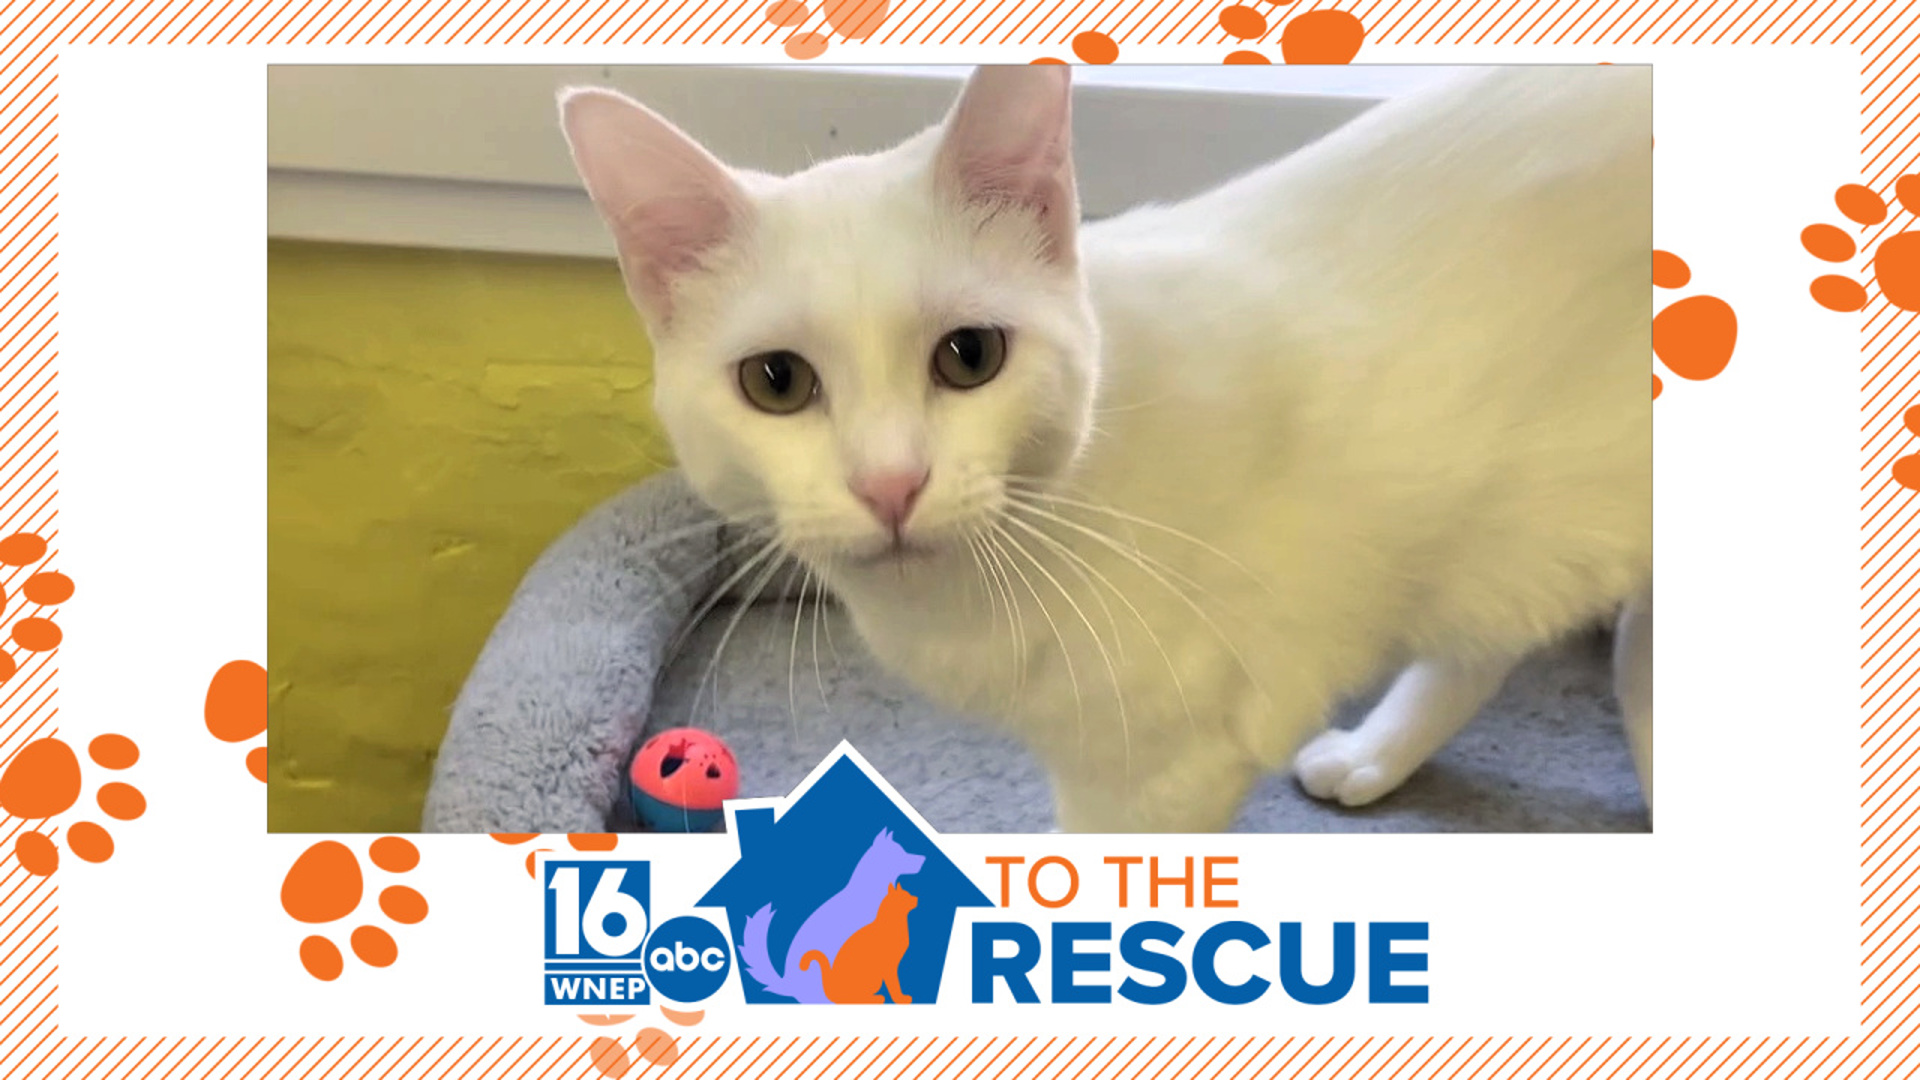 In this week's 16 To The Rescue, we meet a 2-year-old cat who was dumped near an animal shelter in Scranton.